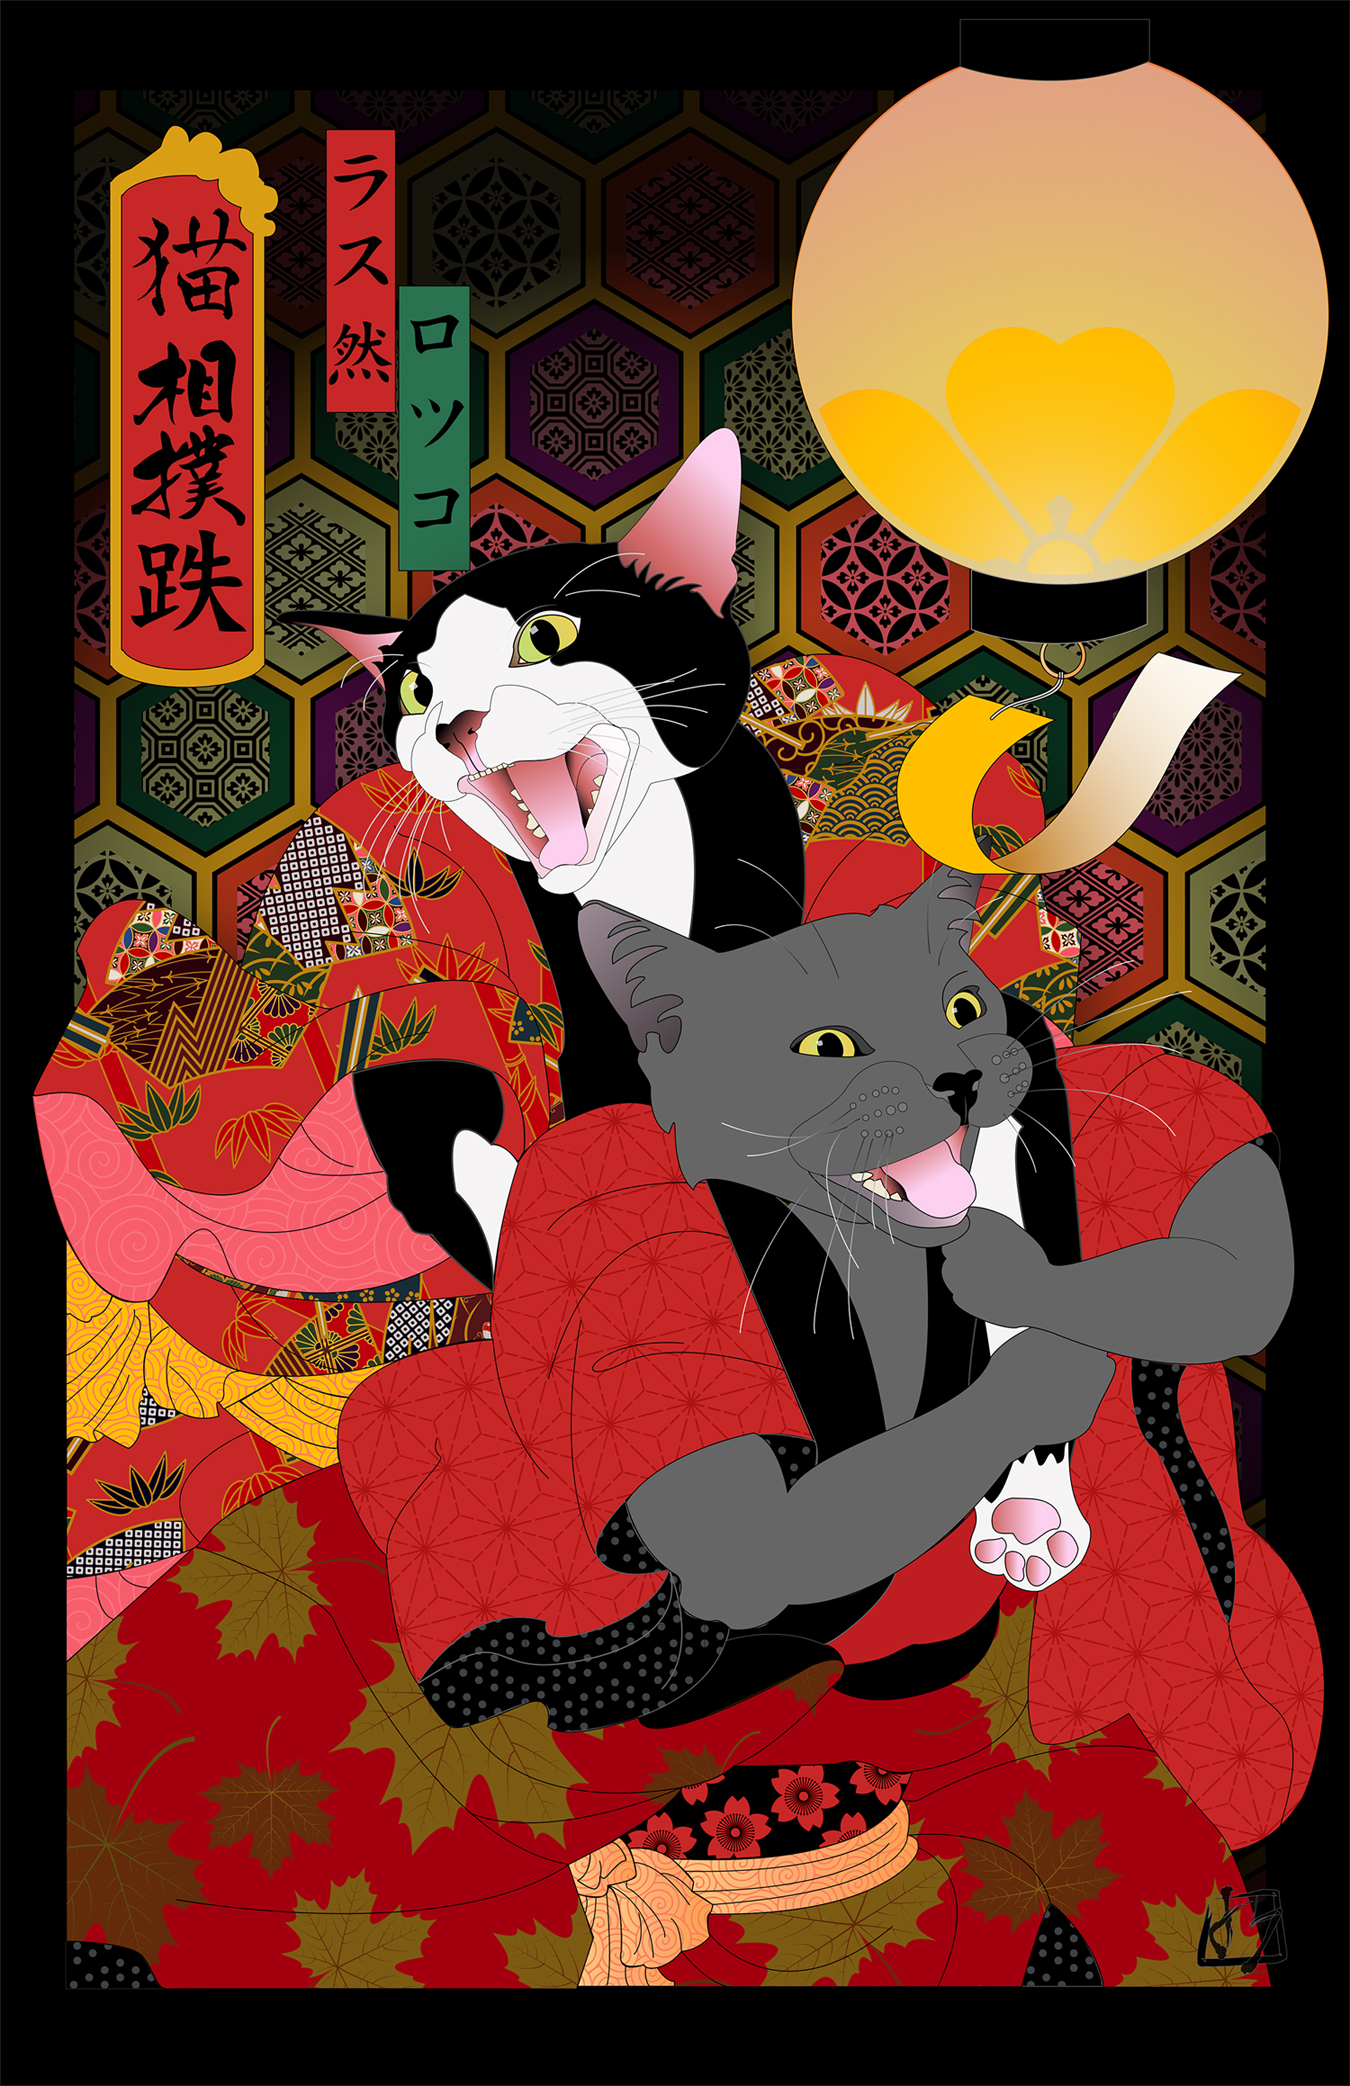 My young cats Rocco and Rousseau at their favorite game. (After Utagawa Kunisada)